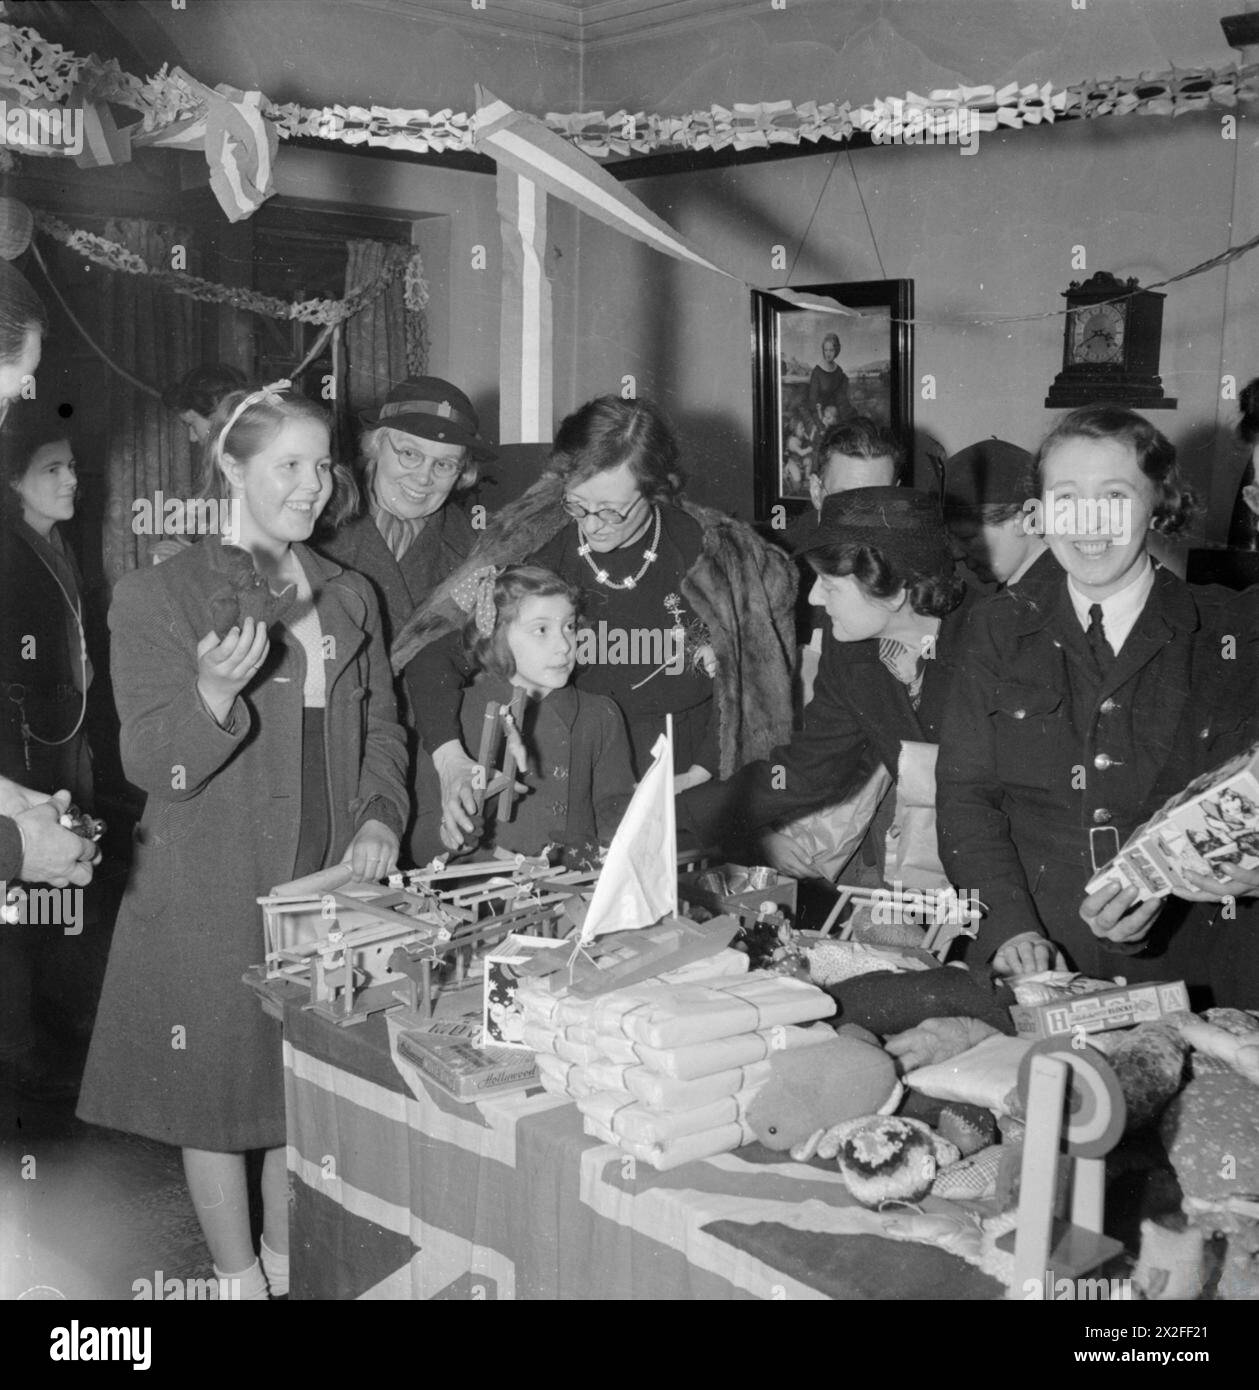 BWRS CHRISTMAS GIFTS DISTRIBUTED TO LONDON'S EAST ENDERS: AMERICAN AID TO THE CANNING TOWN SETTLEMENT, LONDON, ENGLAND, UK, DECEMBER 1944 - Miss Constance Holland, the warden of Canning Town settlement, (centre) helps Norma Terry and Doreen Jones (left) to choose a gift from the pile of American toys on the table in front of them. The room is decorated with paper streamers and a member of the Women's Voluntary Service (WVS) can be seen between Doreen and Norma. The girls are both from Plaistow Stock Photo